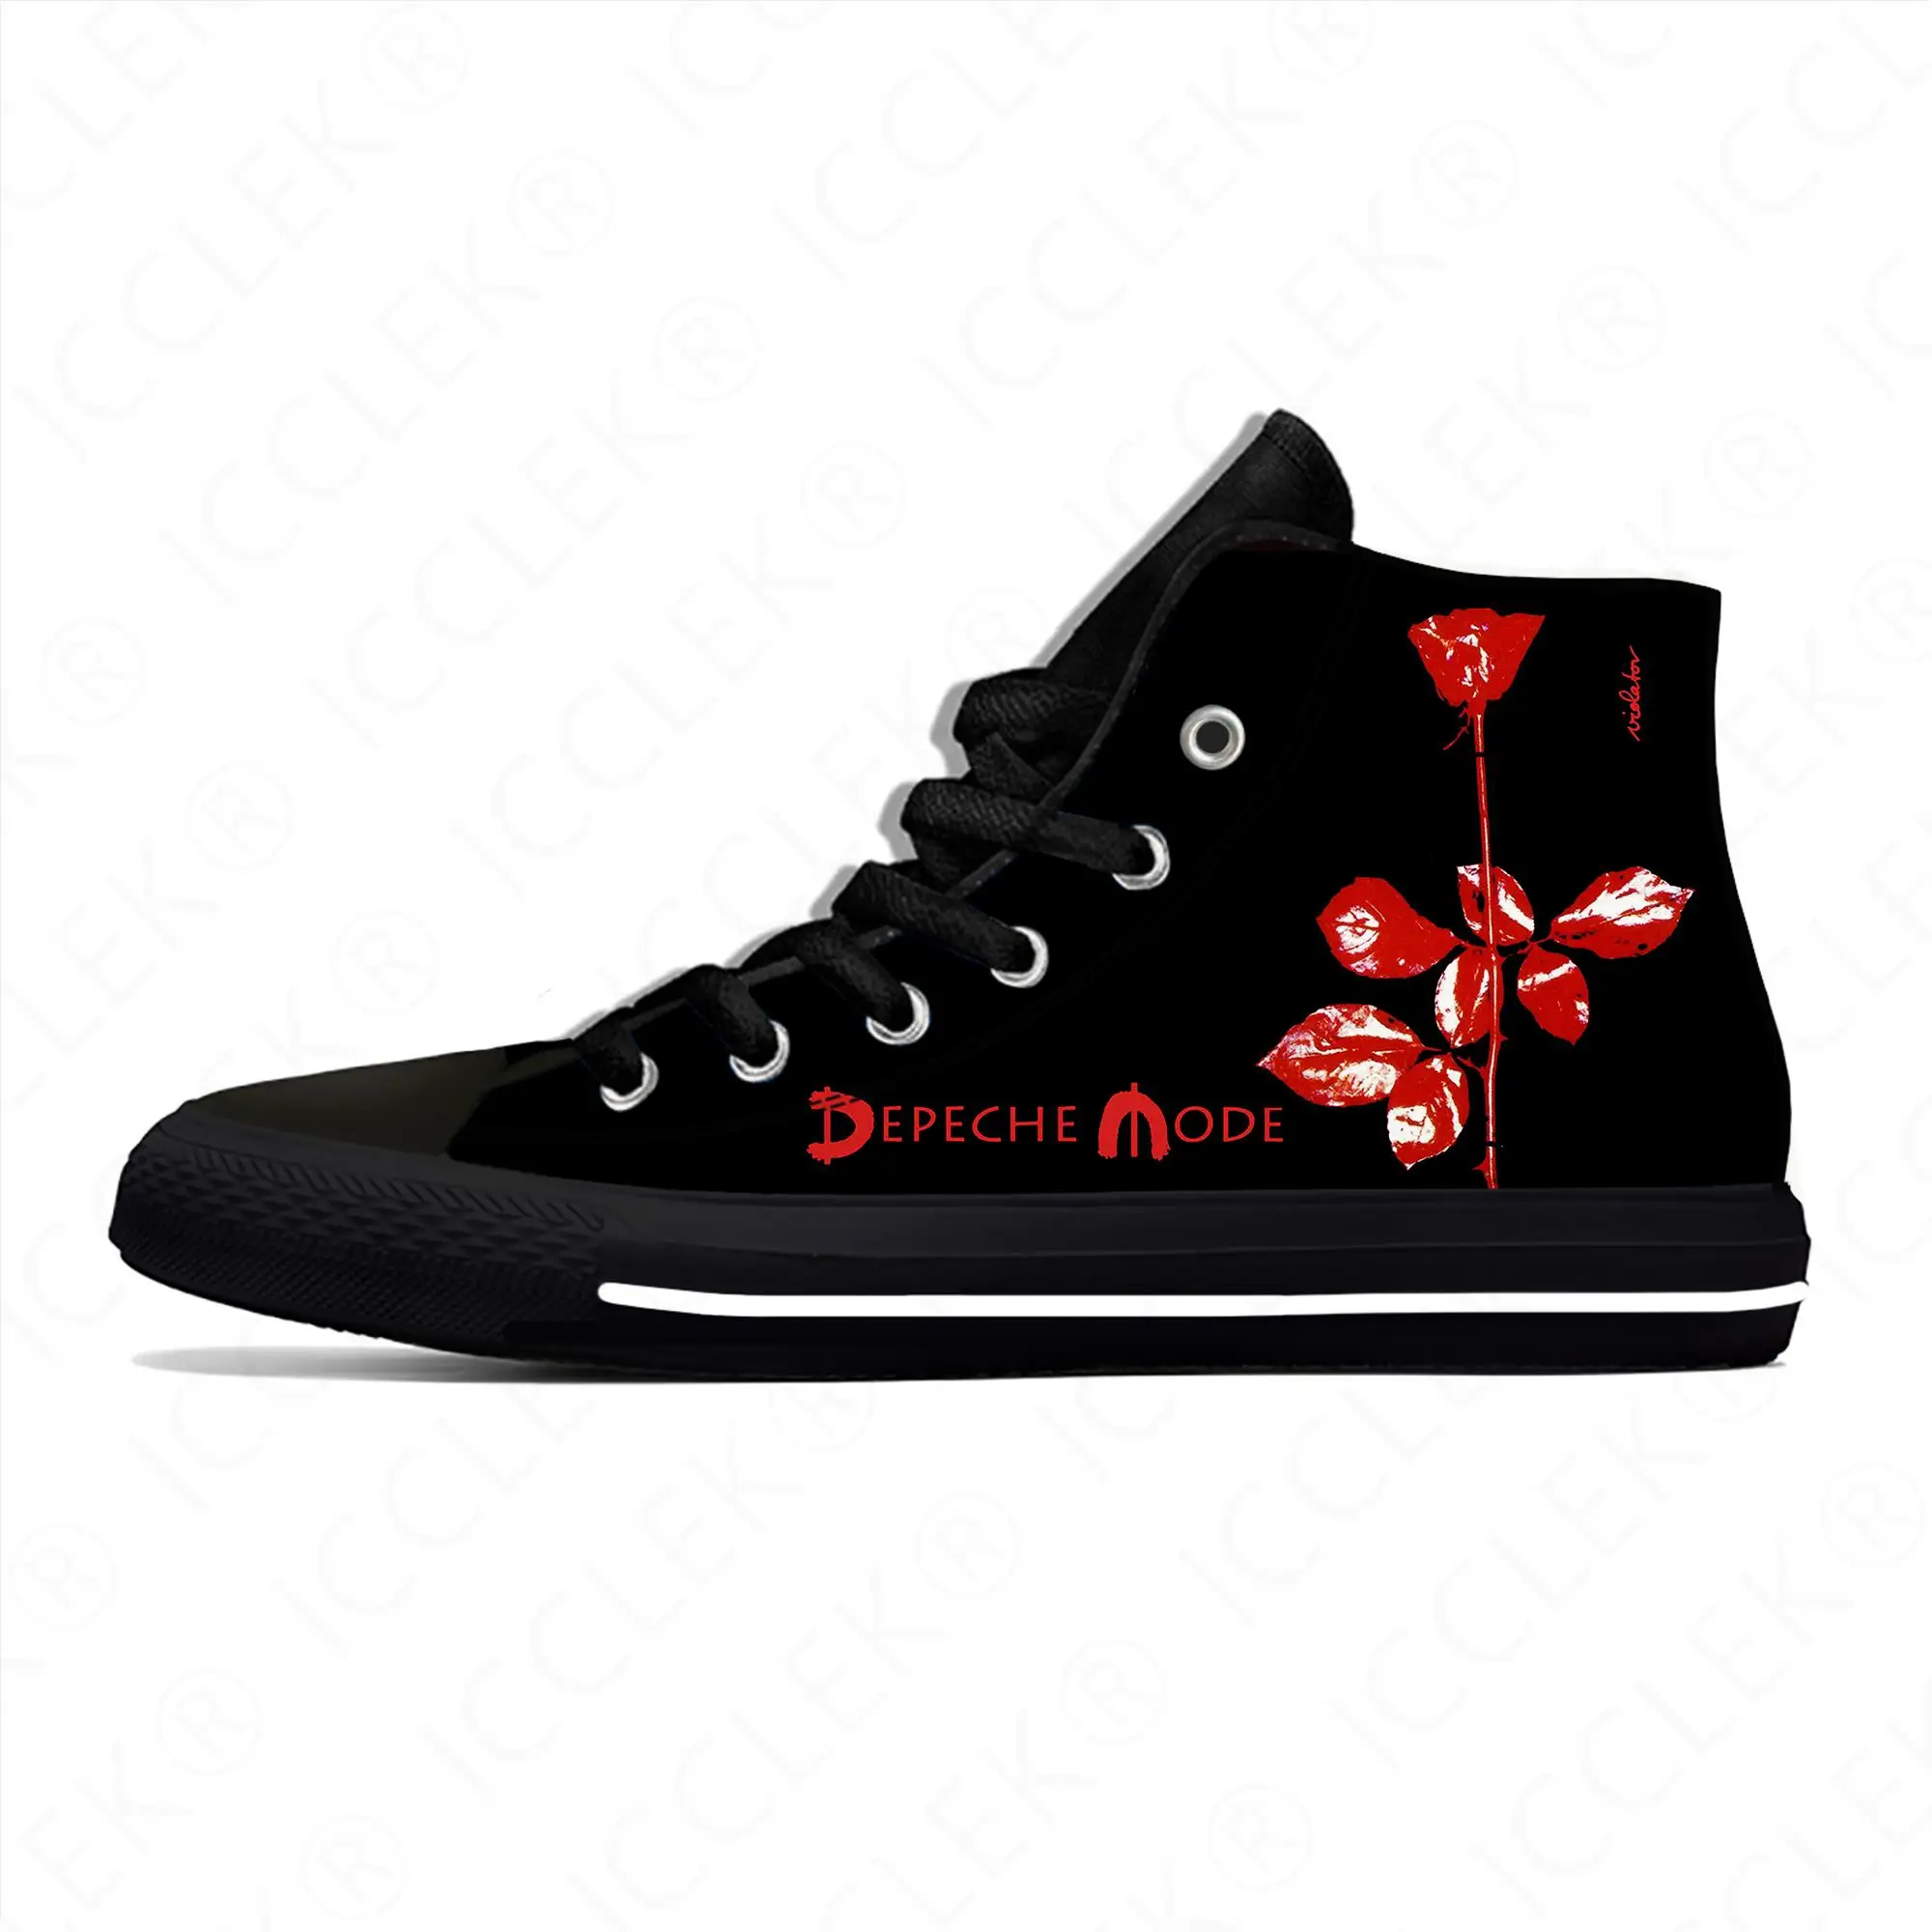 

Depeche Band High Top Sneakers Mode Mens Womens Teenager Casual Shoes DM Canvas Running Shoes 3D Printed Lightweight shoe